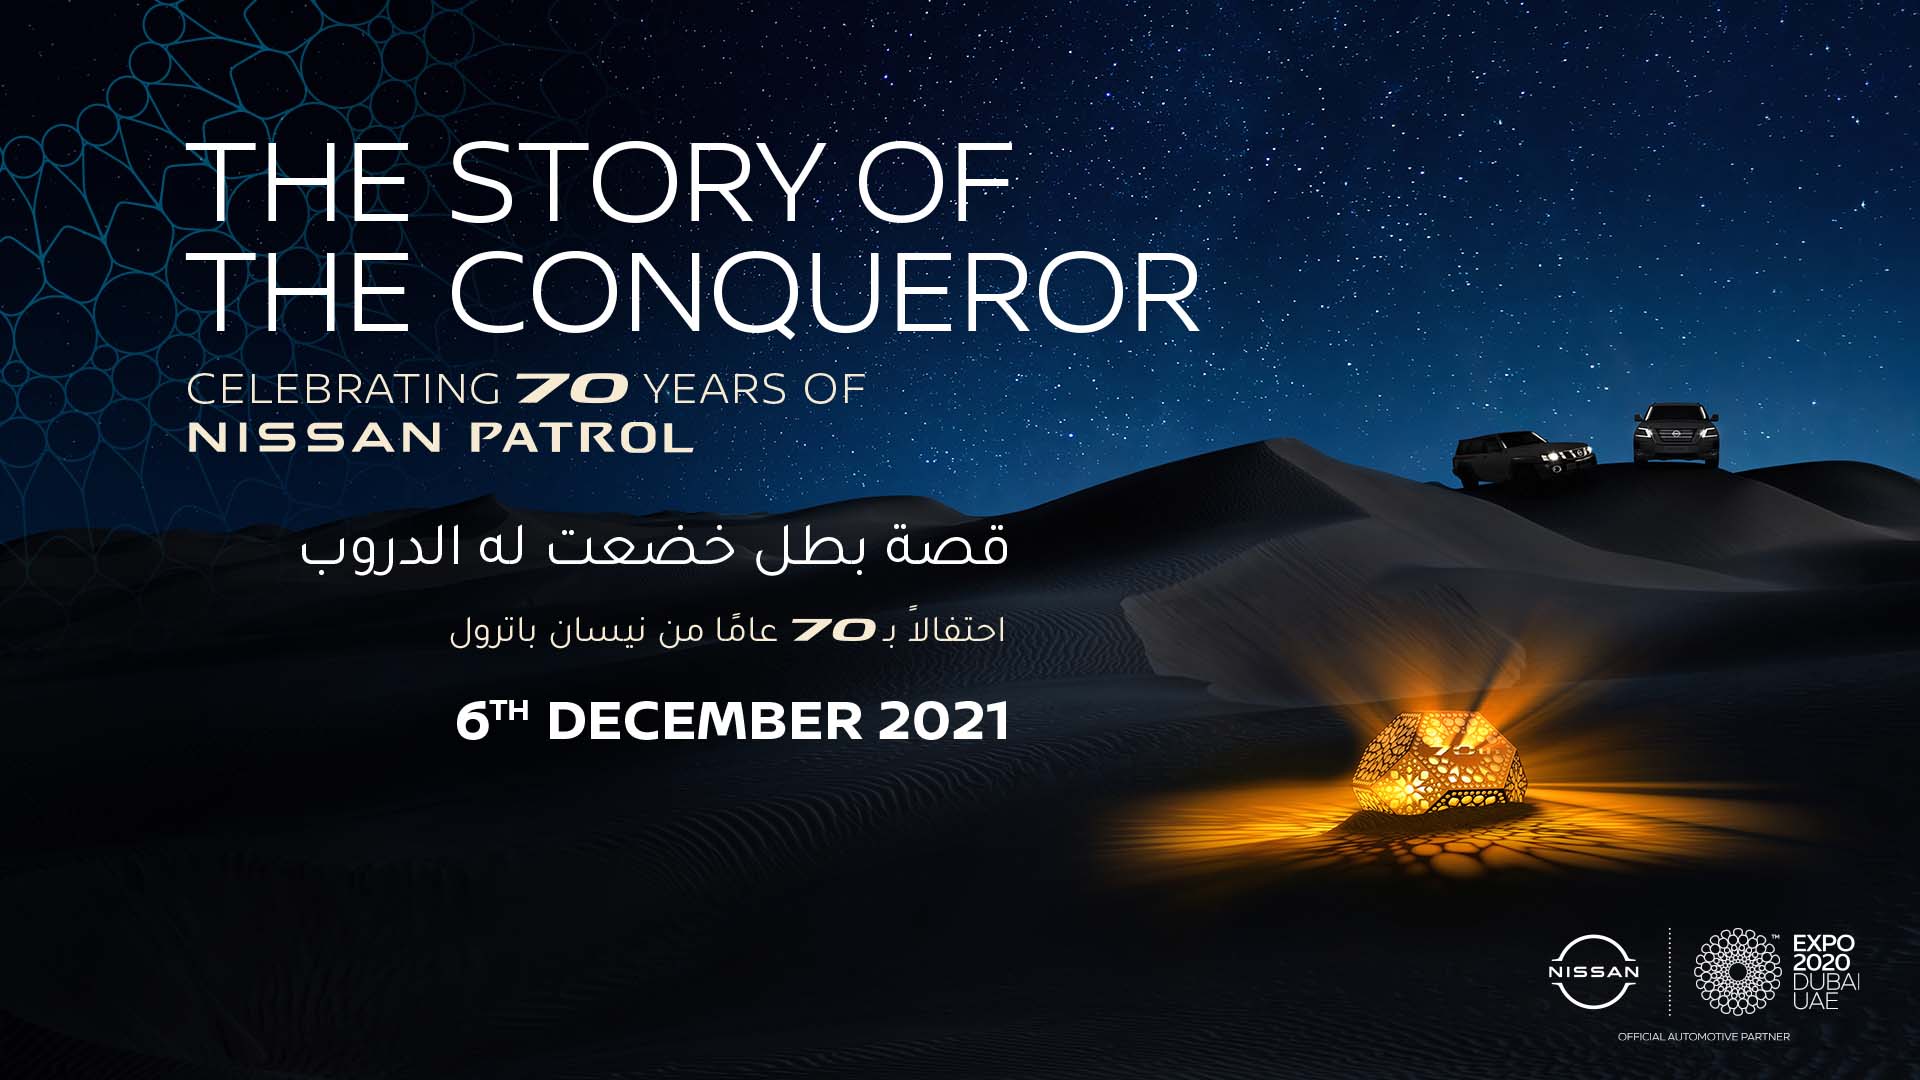 Nissan invites audiences to global event marking Patrol’s 70th Anniversary on December 6th